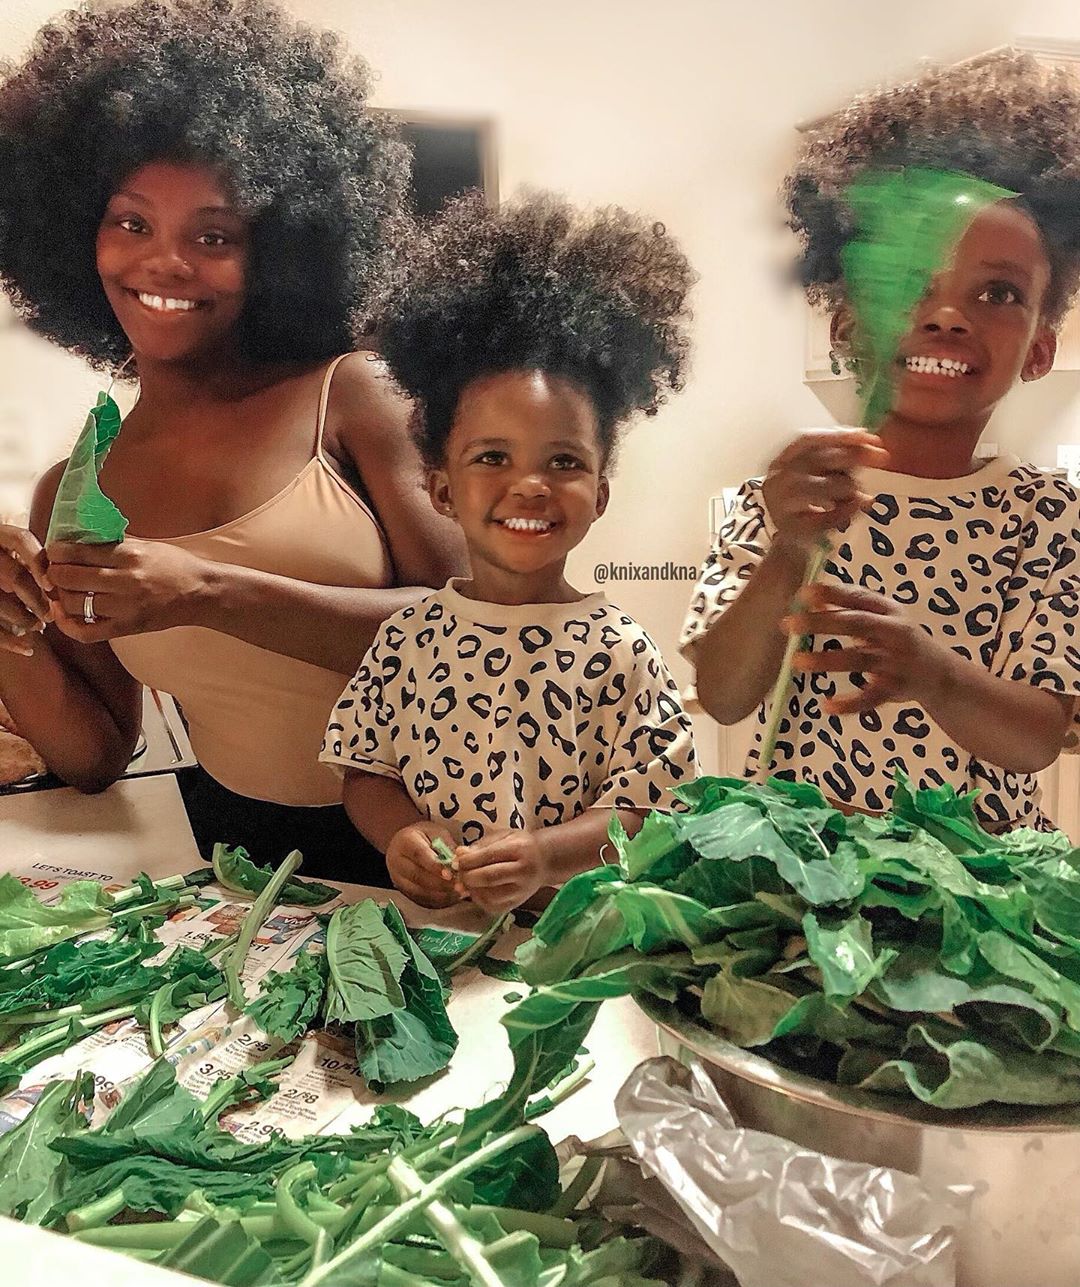 This Family Is Breaking The Internet With Their Color-Coordinated Outfits